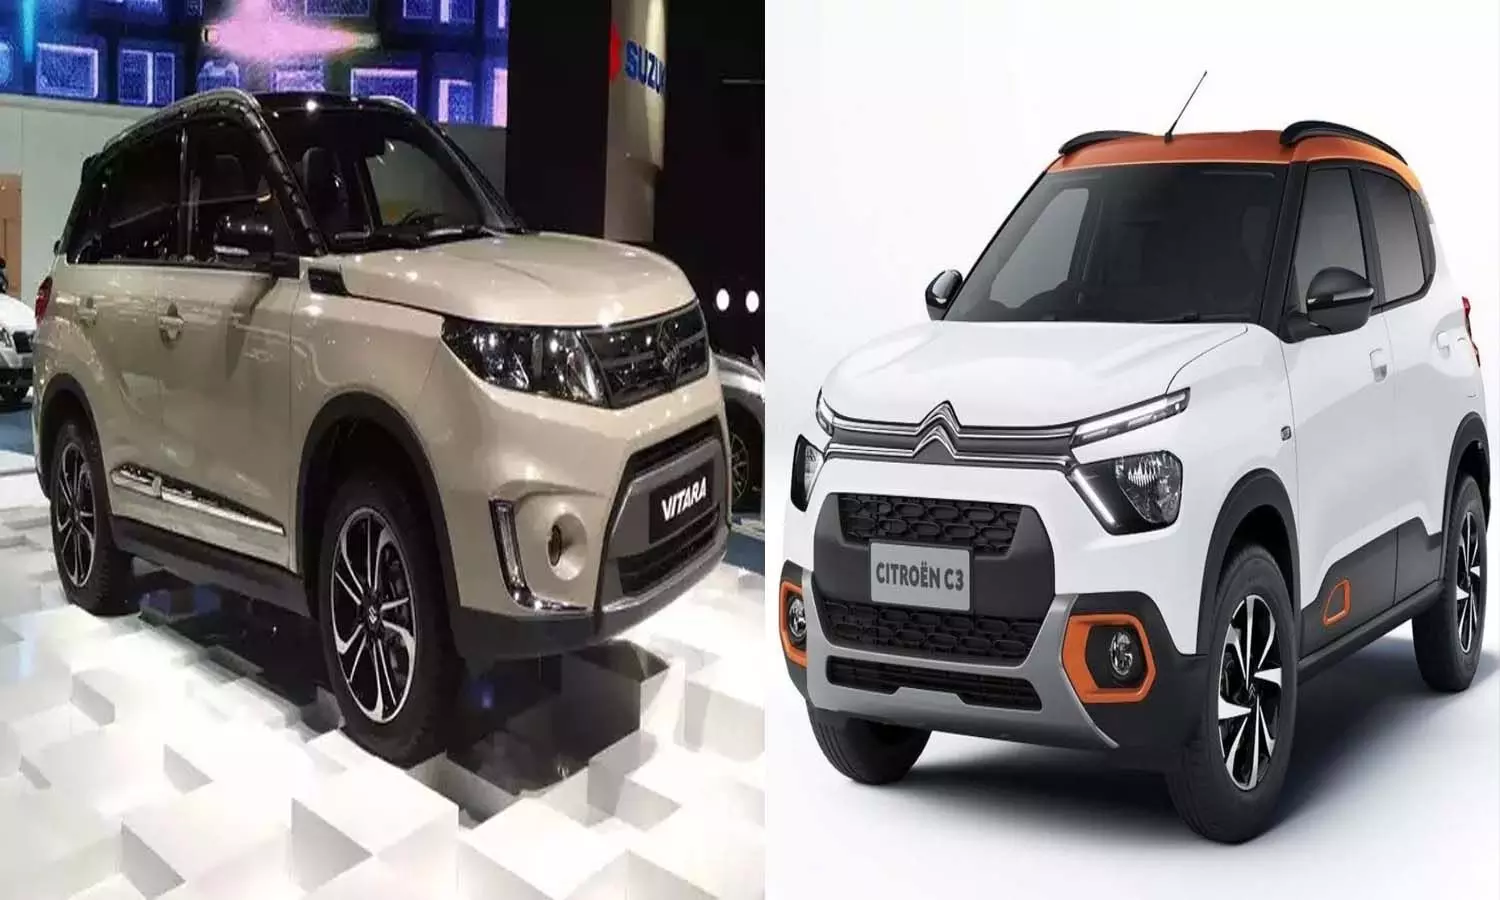 These two SUVs are being launched in July, Tehelka will create havoc in the market, Creta will get a challenge